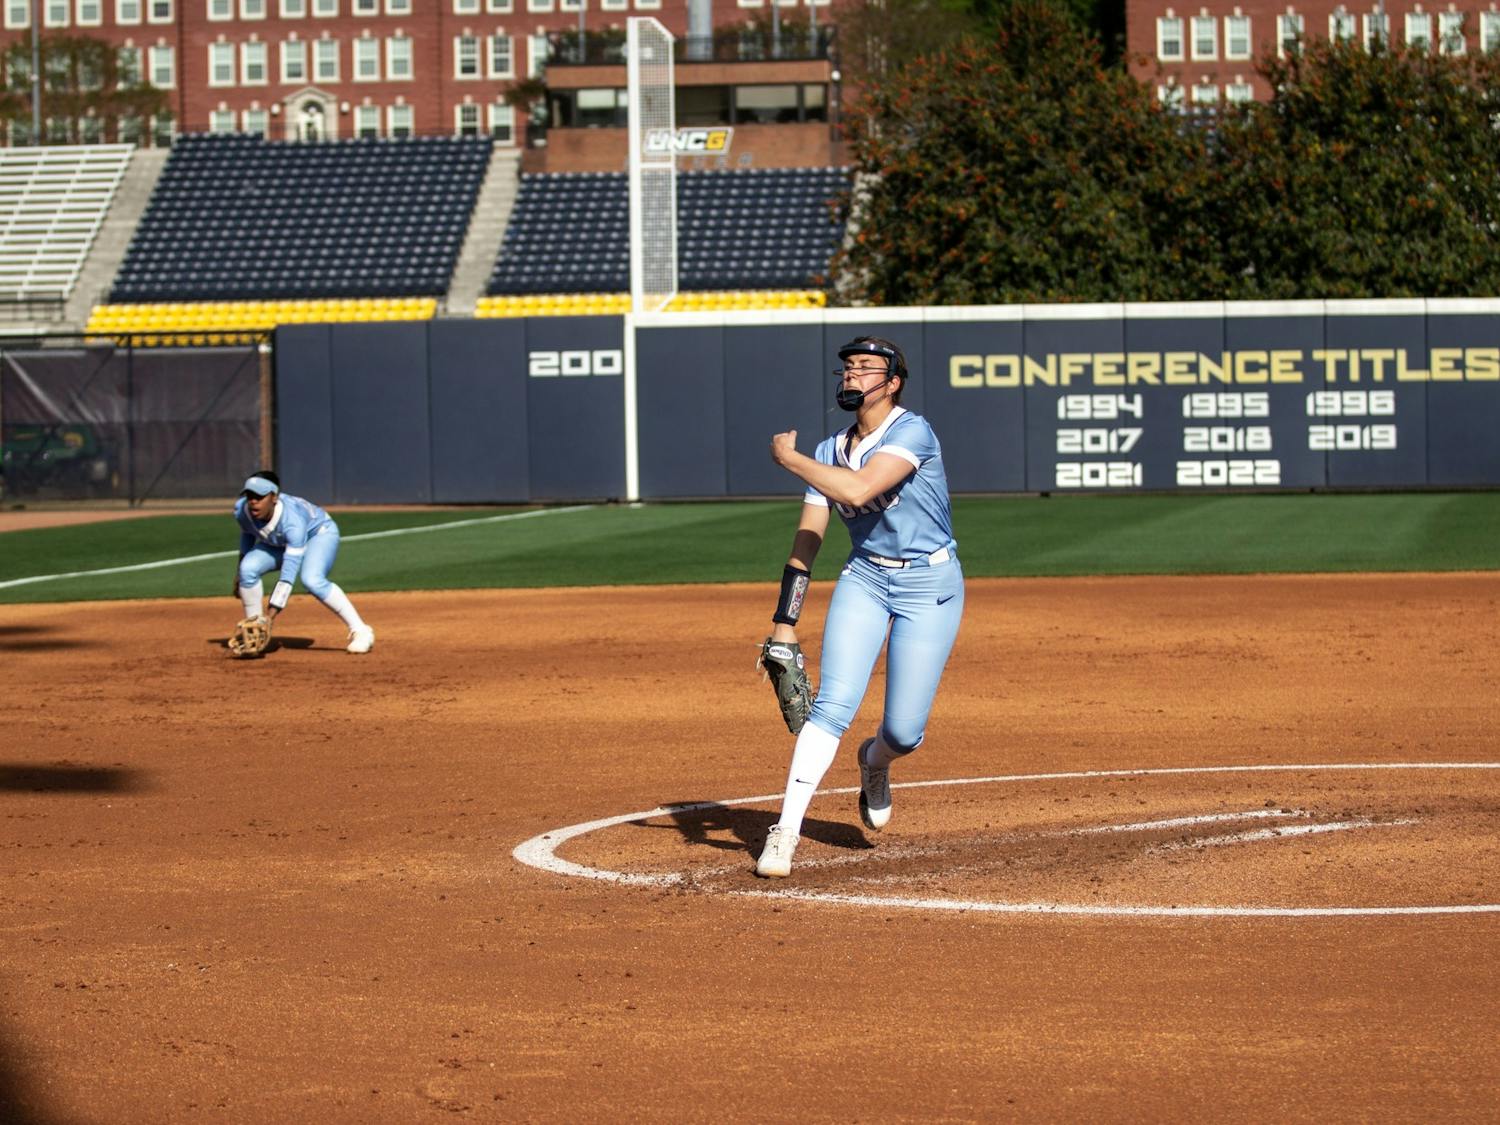 Sophomore Pitcher Lilli Backes (99) unleashes a fastball during a game between North Carolina and UNCG in Greensboro on April 4, 2023.